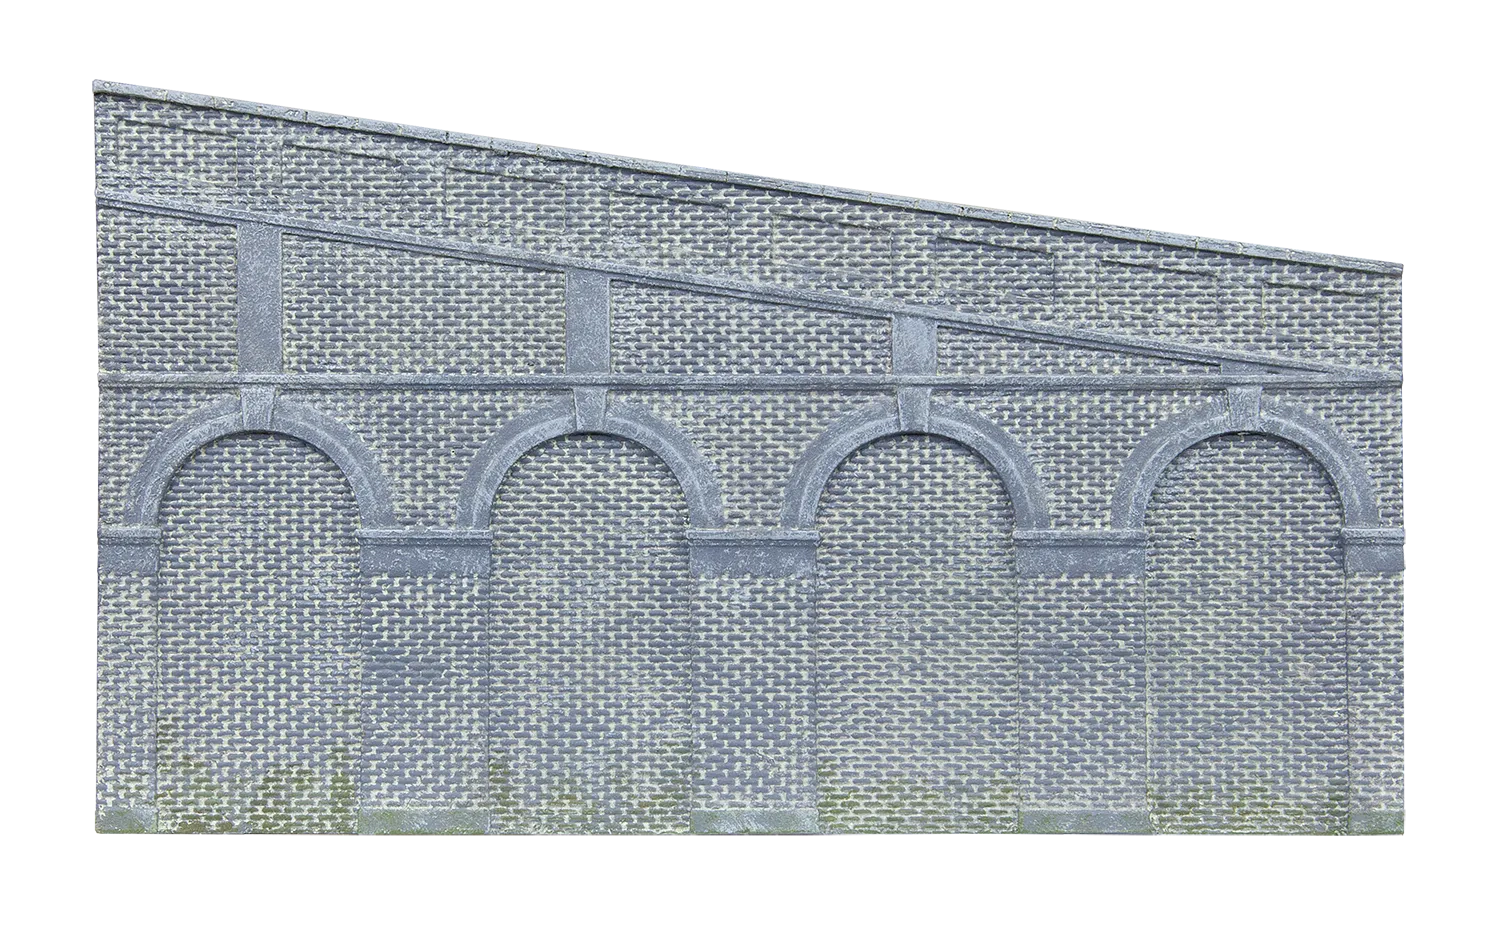 High Stepped Arched Retaining Walls x 2 (Engineers Blue Brick) - Chester Model Centre